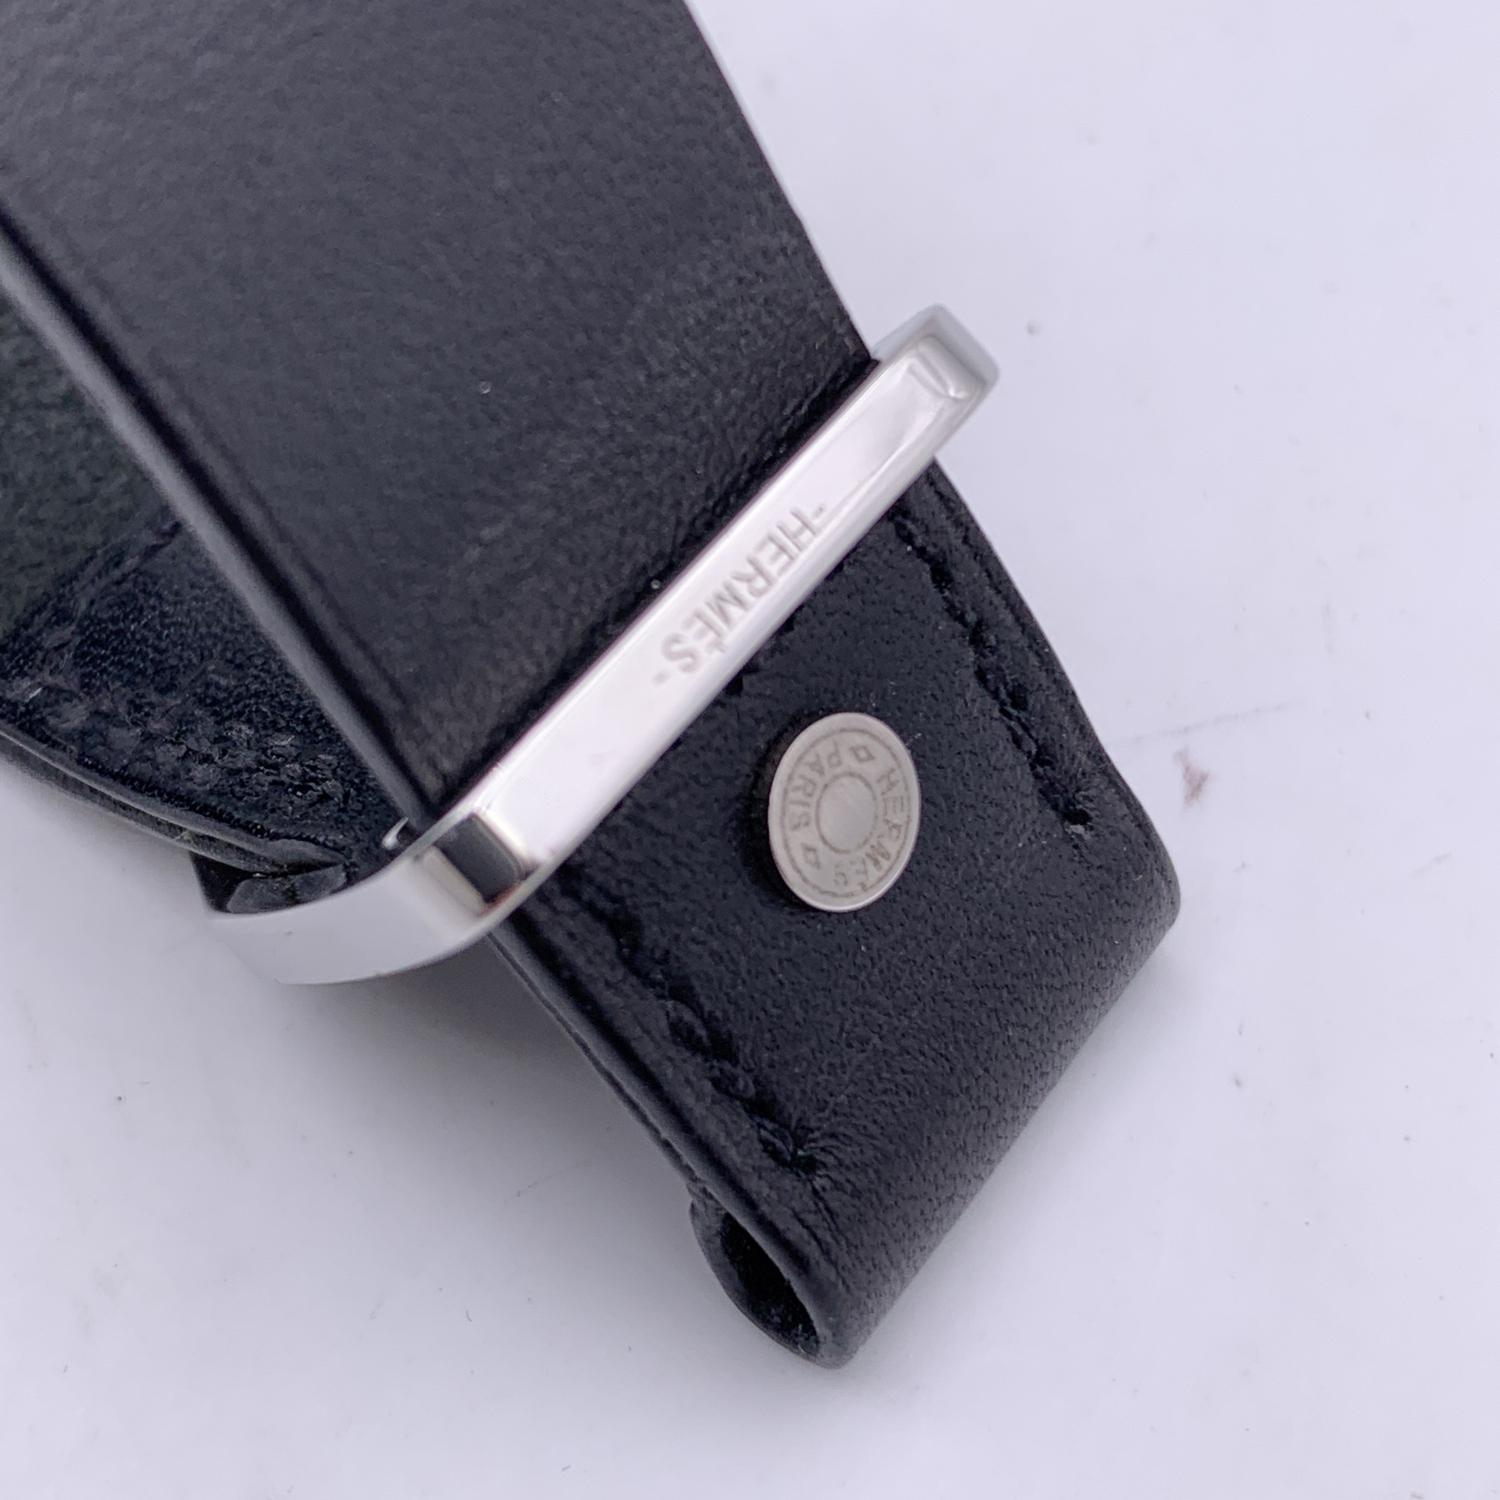 Hermes leather bracelet in black color. Silver buckle. For wrists up to 7 inches - 17.8 cm in circumference. Signed 'Hermes' hardware. Signed hardware. Data code and blind stamp engraved on the reverse of the bracelet. Made in